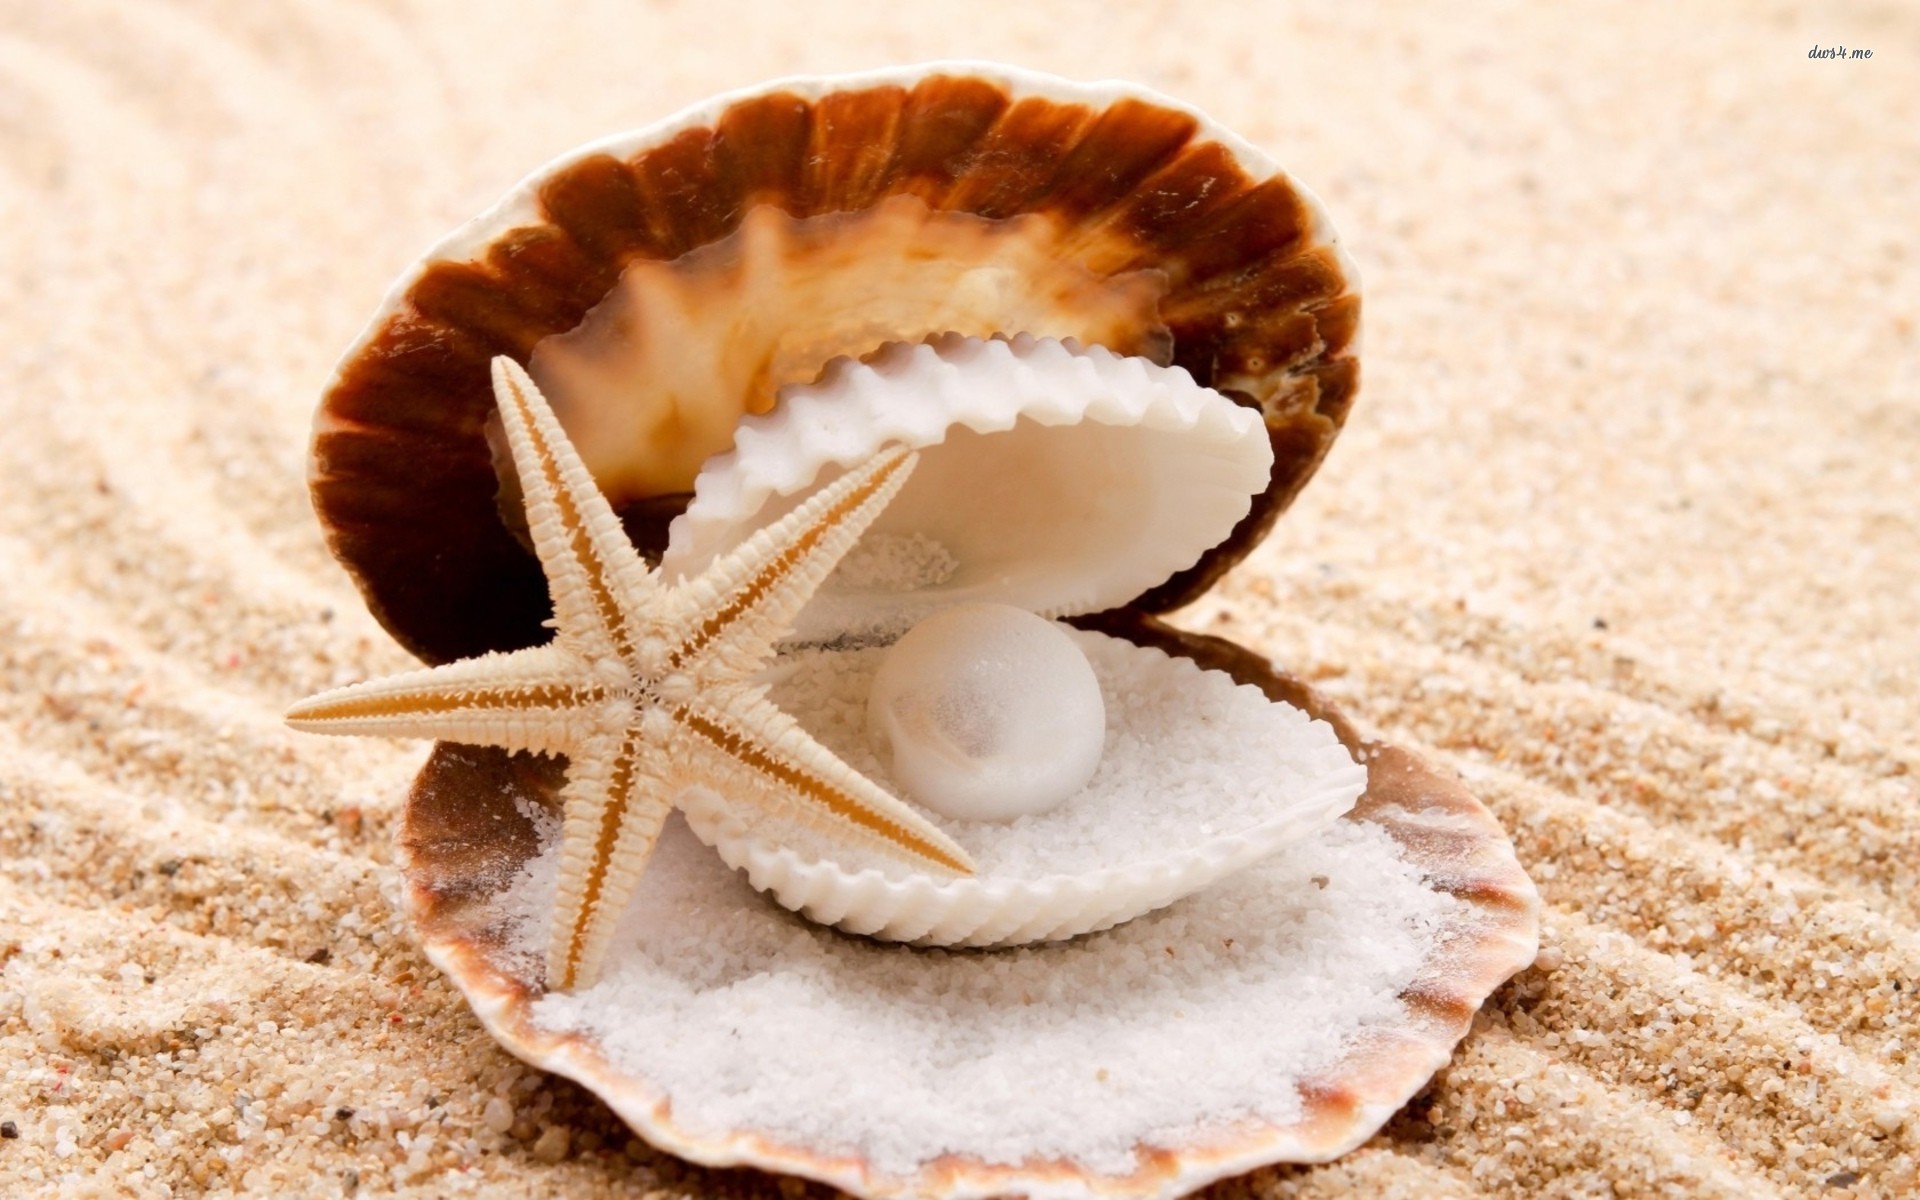 Earth Shell HD Wallpaper | Background Image